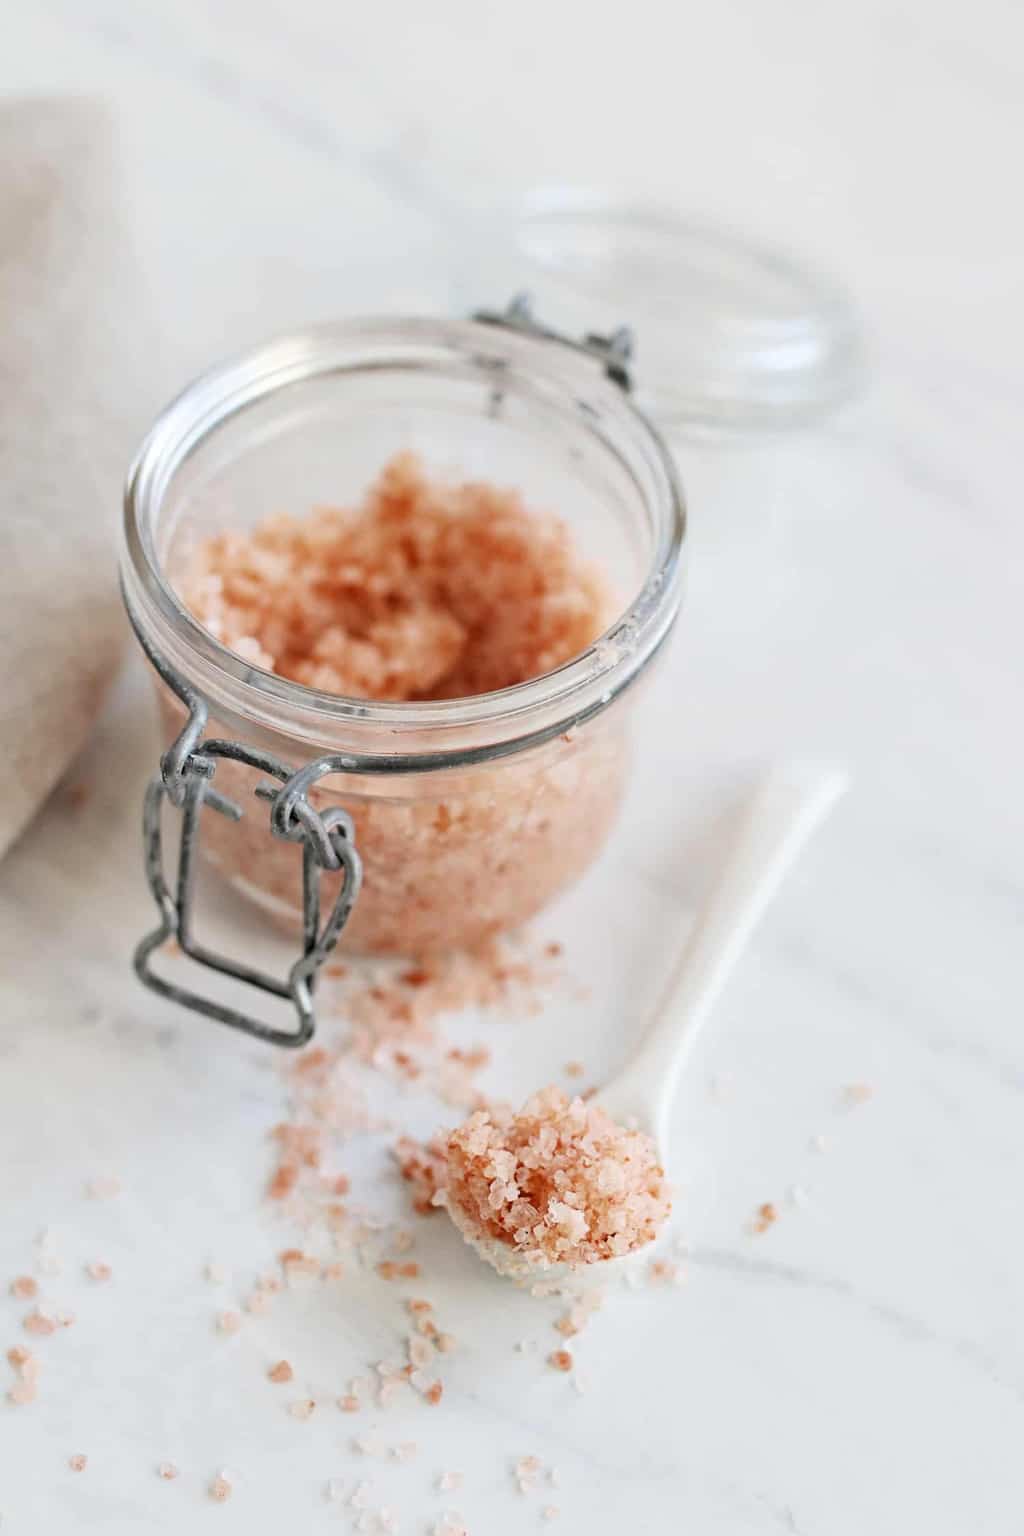 This detoxifying apple cider vinegar scrub uses finely ground pink Himalayan salt to slough away dead skin and deep clean hair follicles.